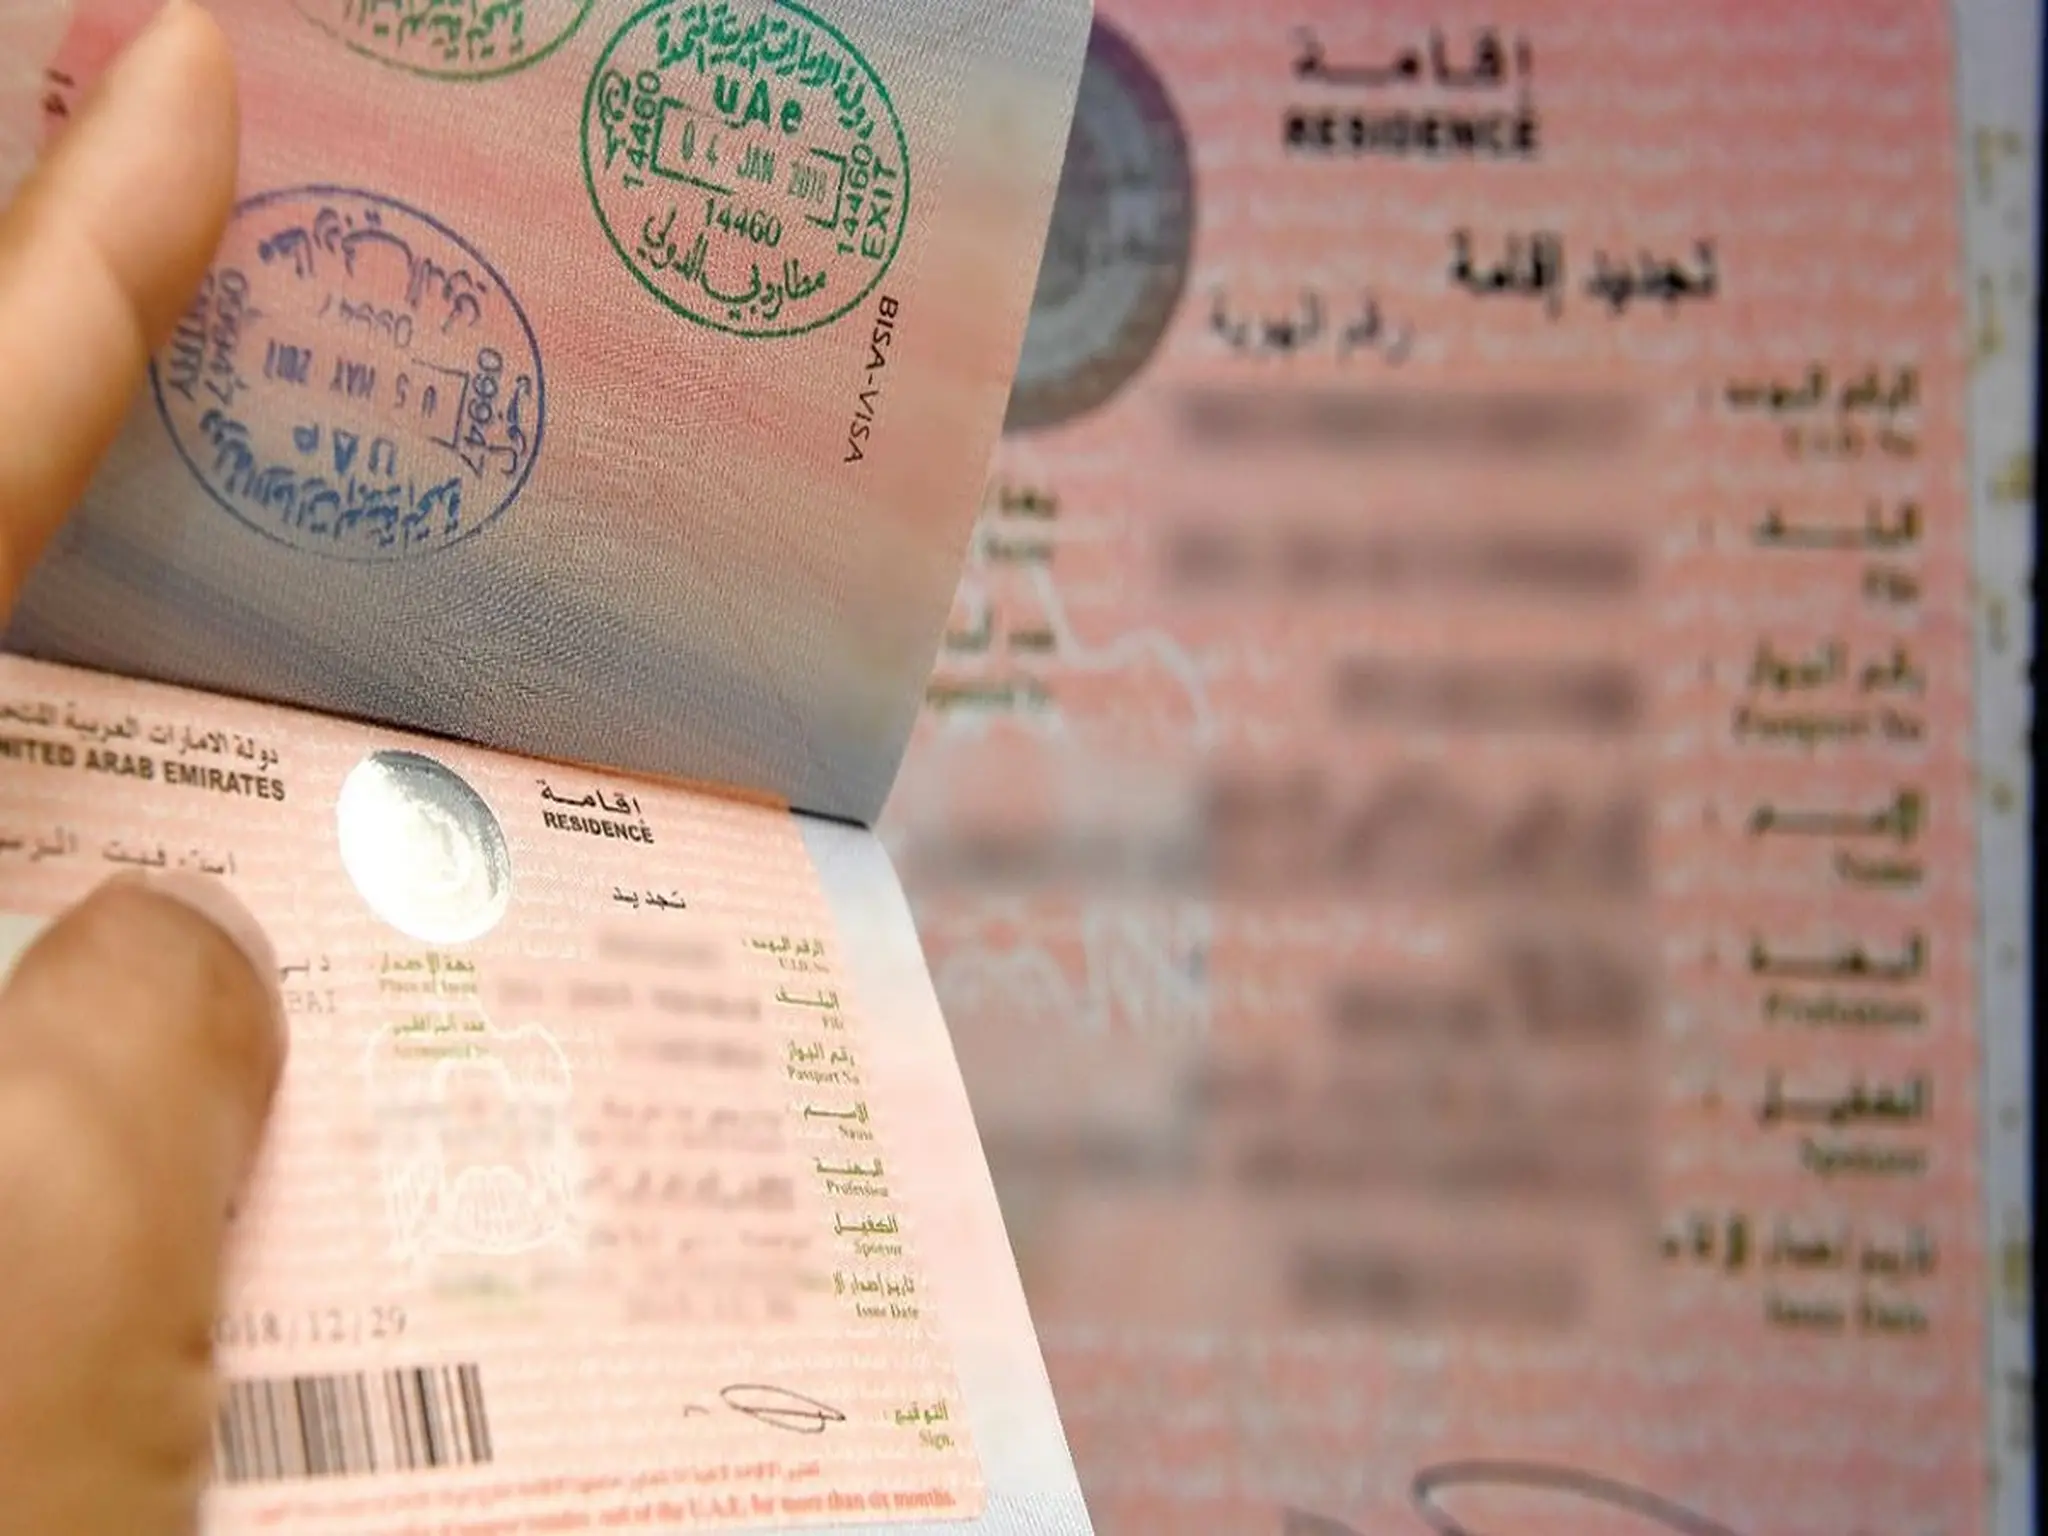 The UAE issues free entry permits and a family visit visa